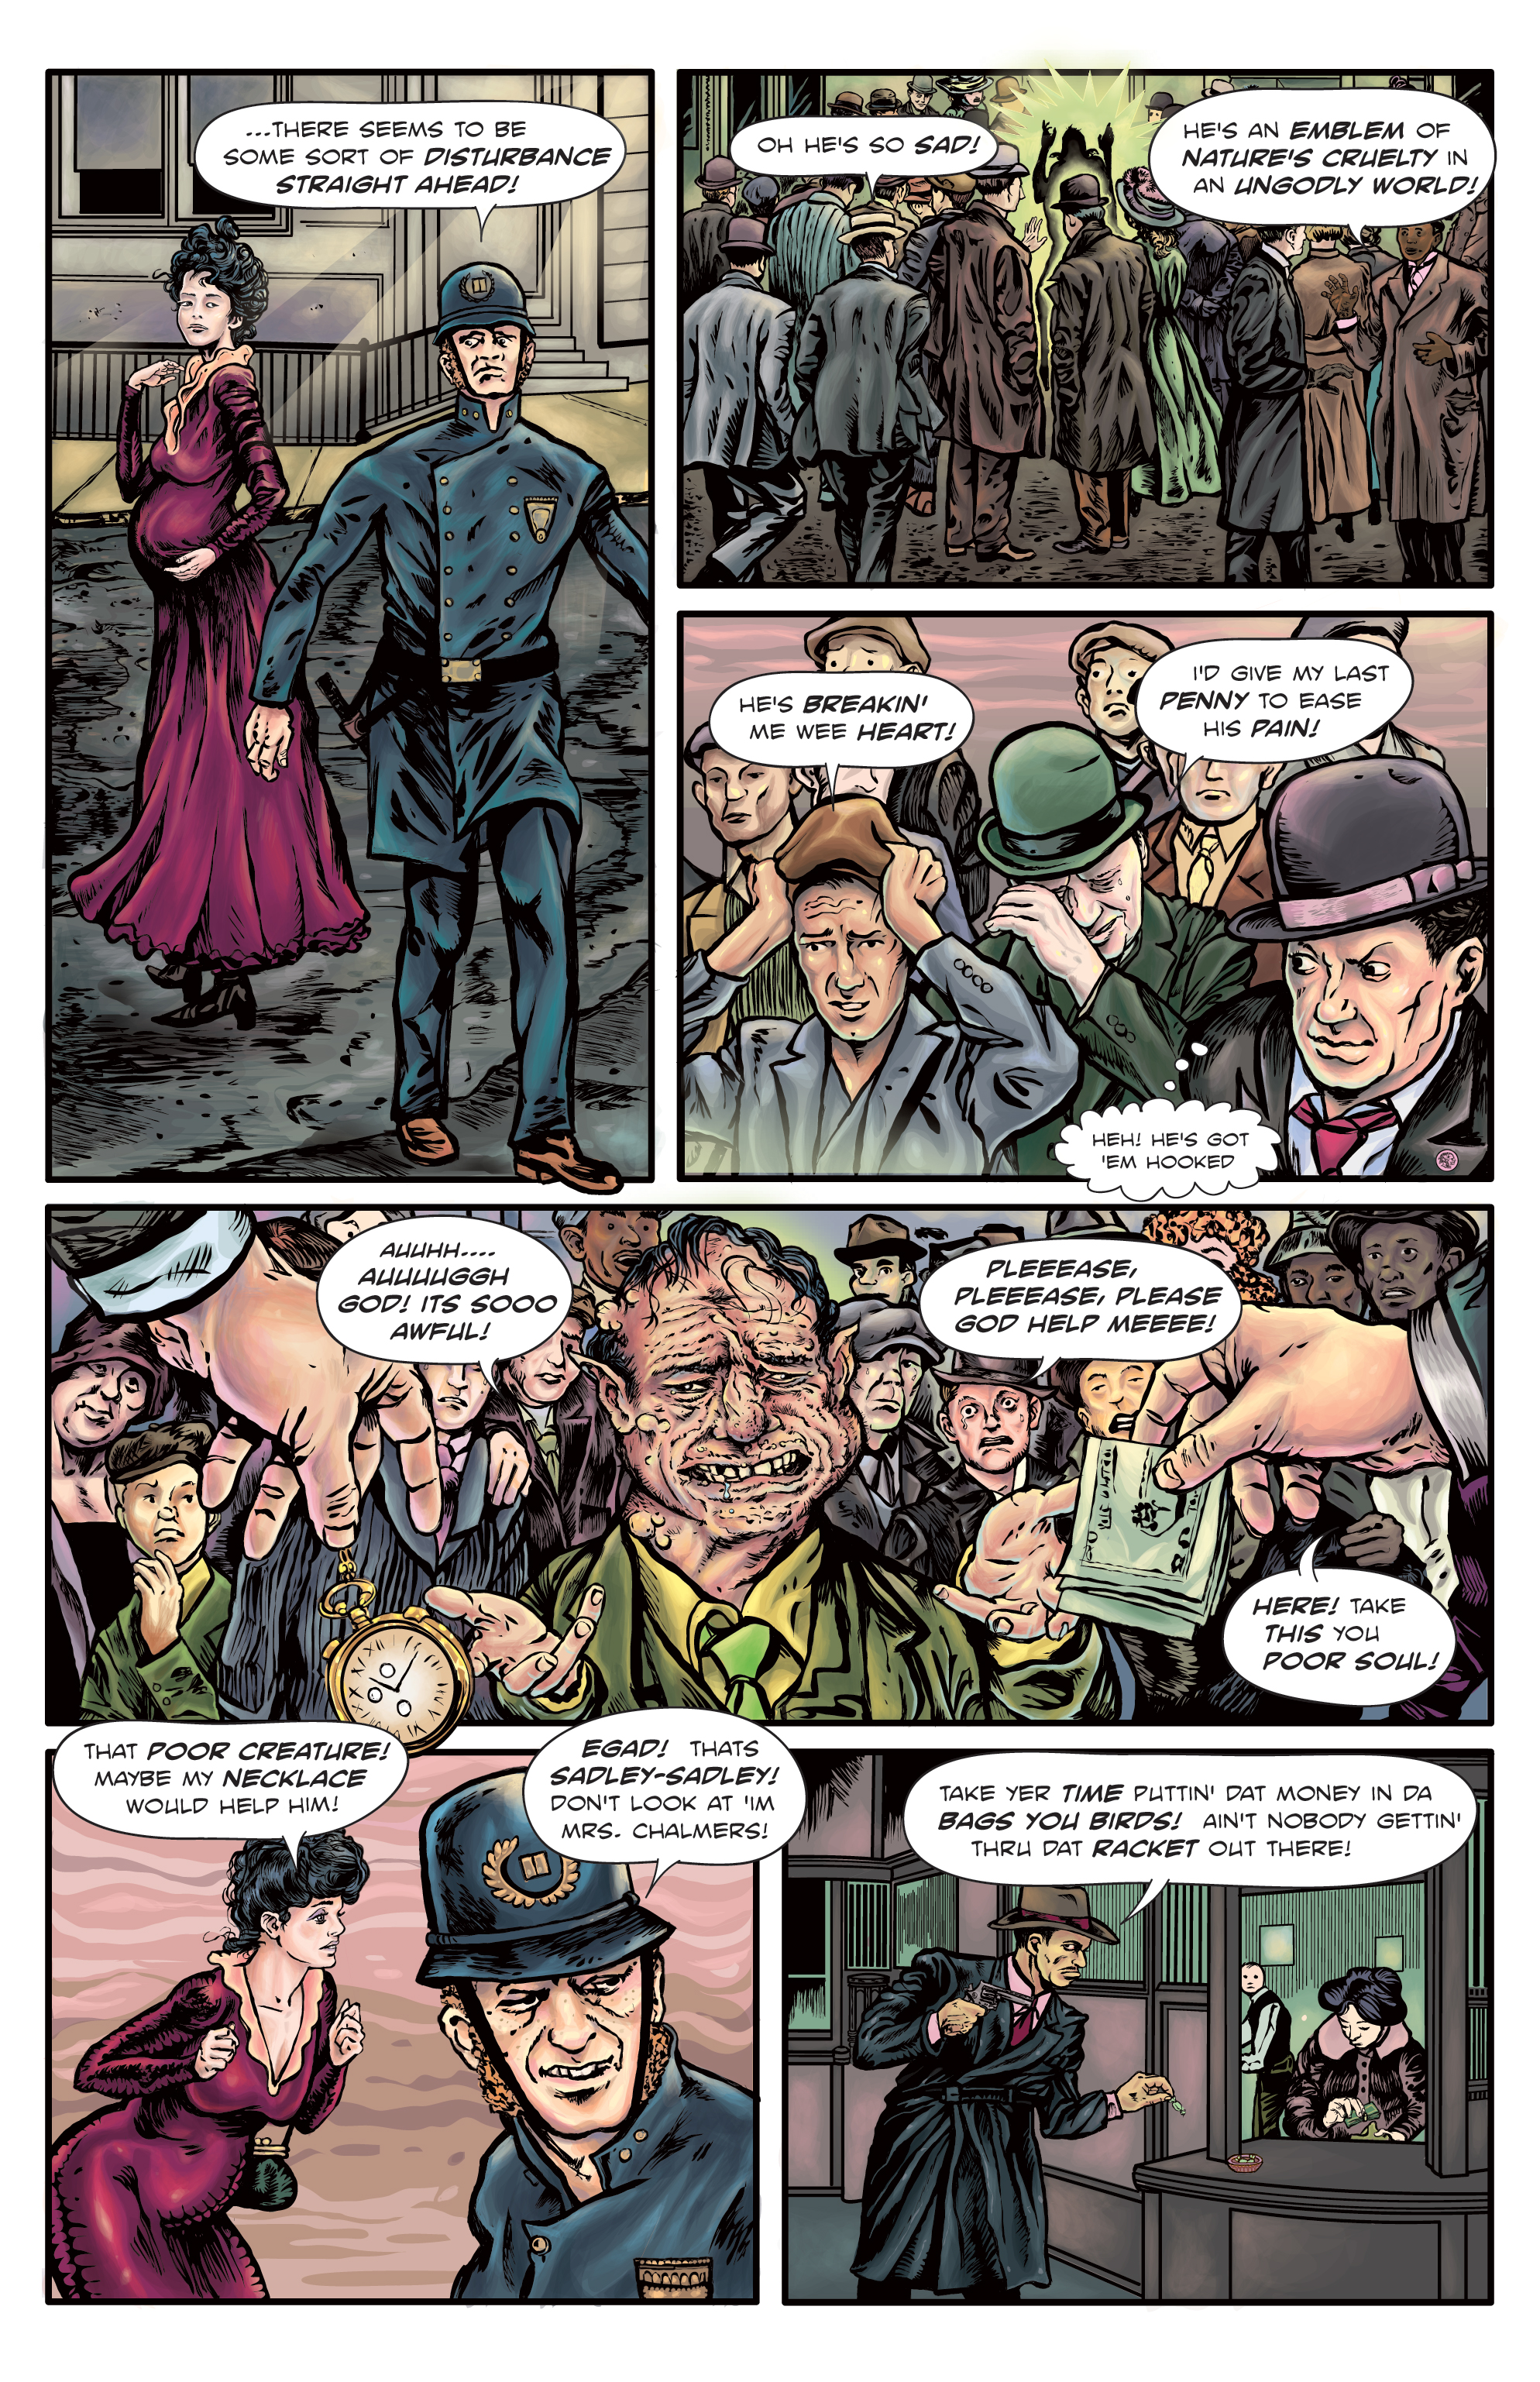 The Enchanted Dagger # 4 – Page 2